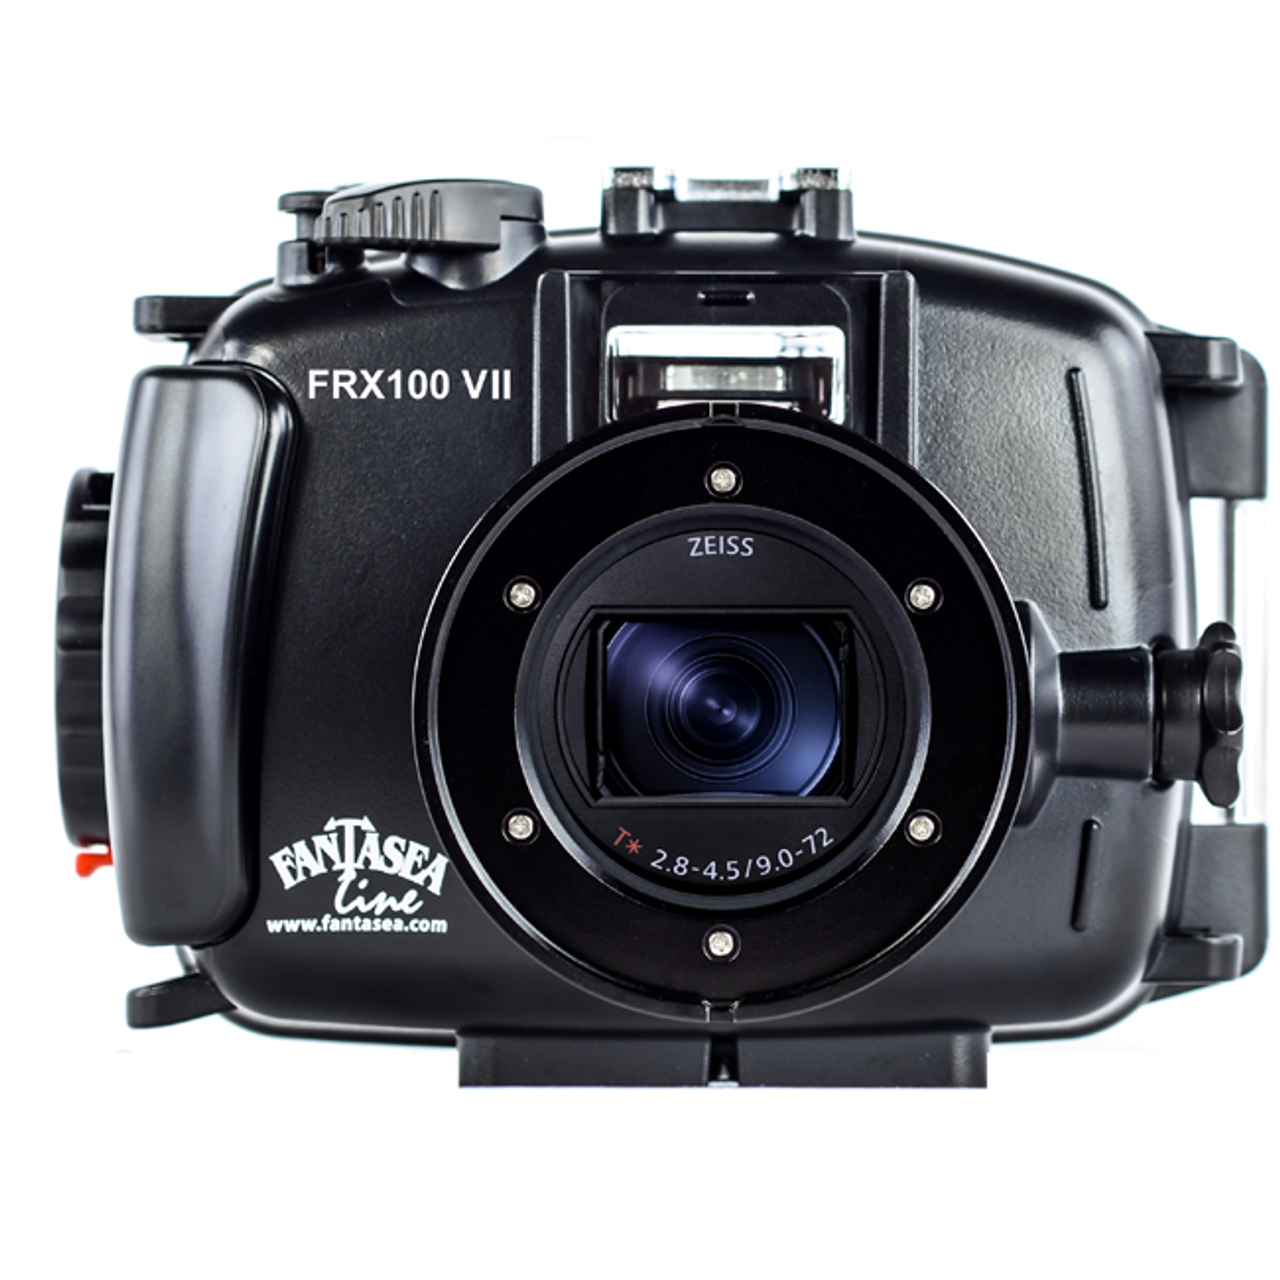 Sony RX100 VII Review - Underwater Photography Guide